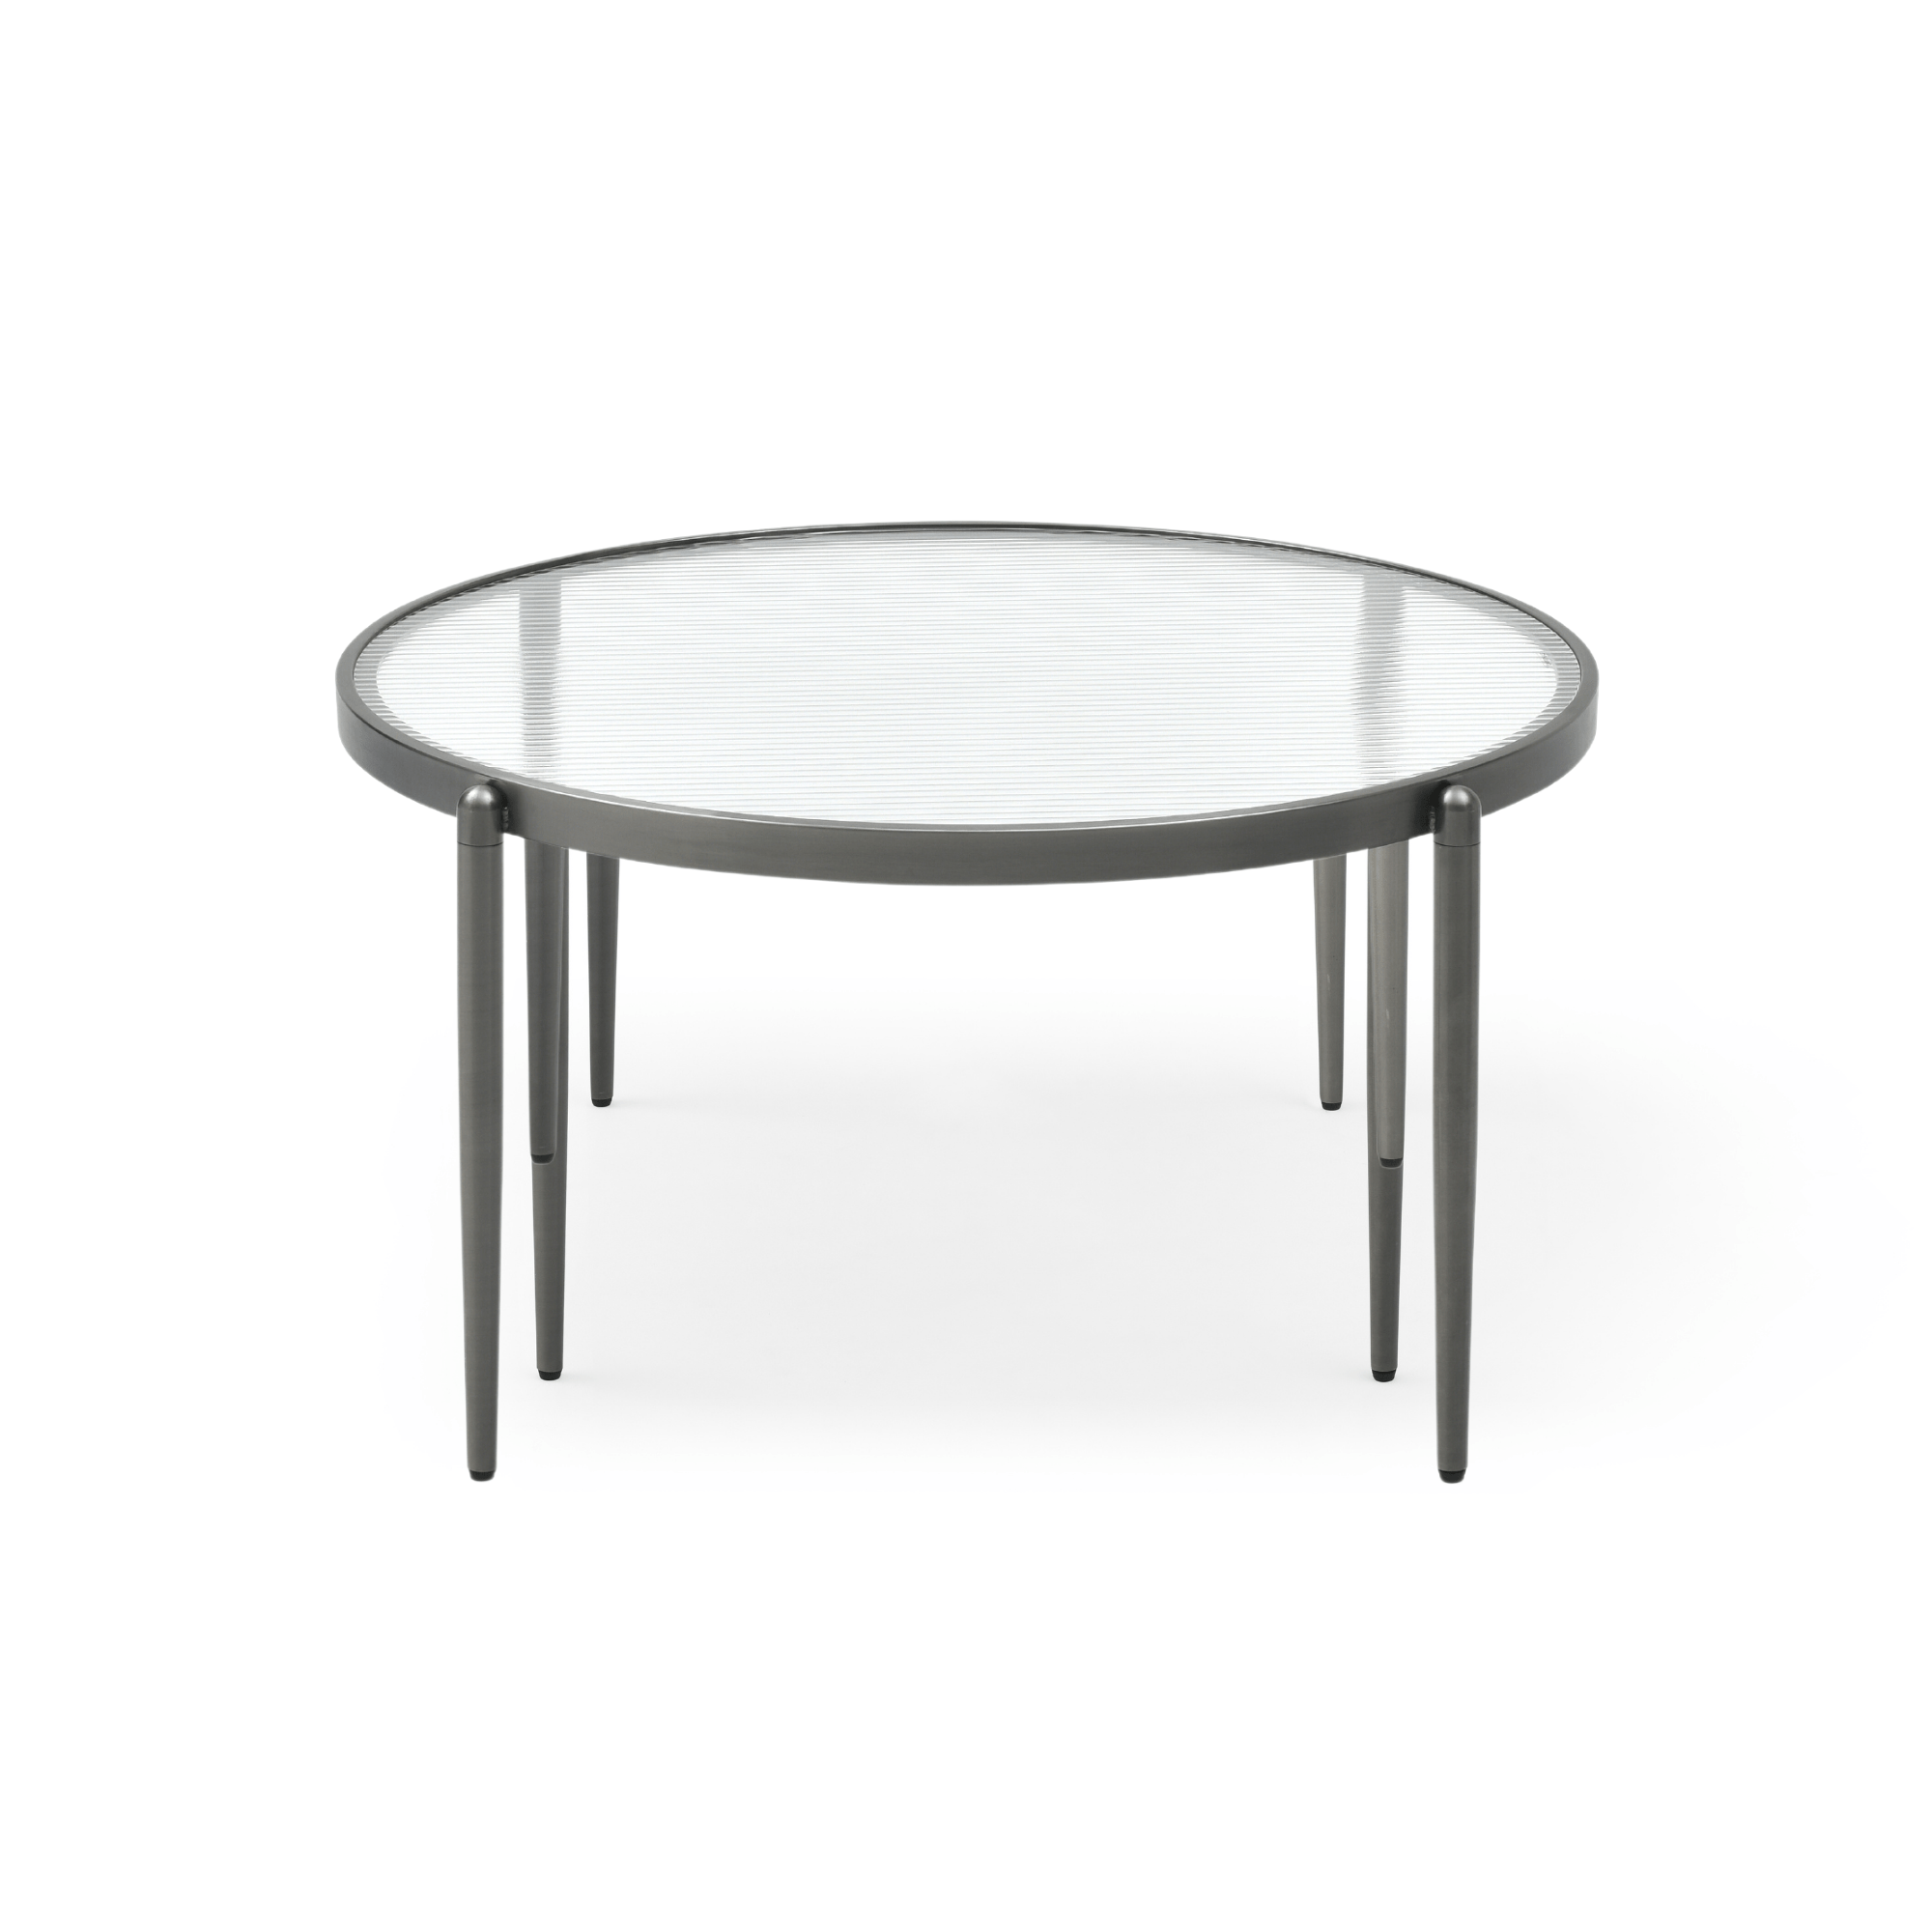 Seek & Ramble Coffee Tables Gatsby Set of 2 Coffee Table Nest Fluted Glass & Brushed Gunmetal Grey